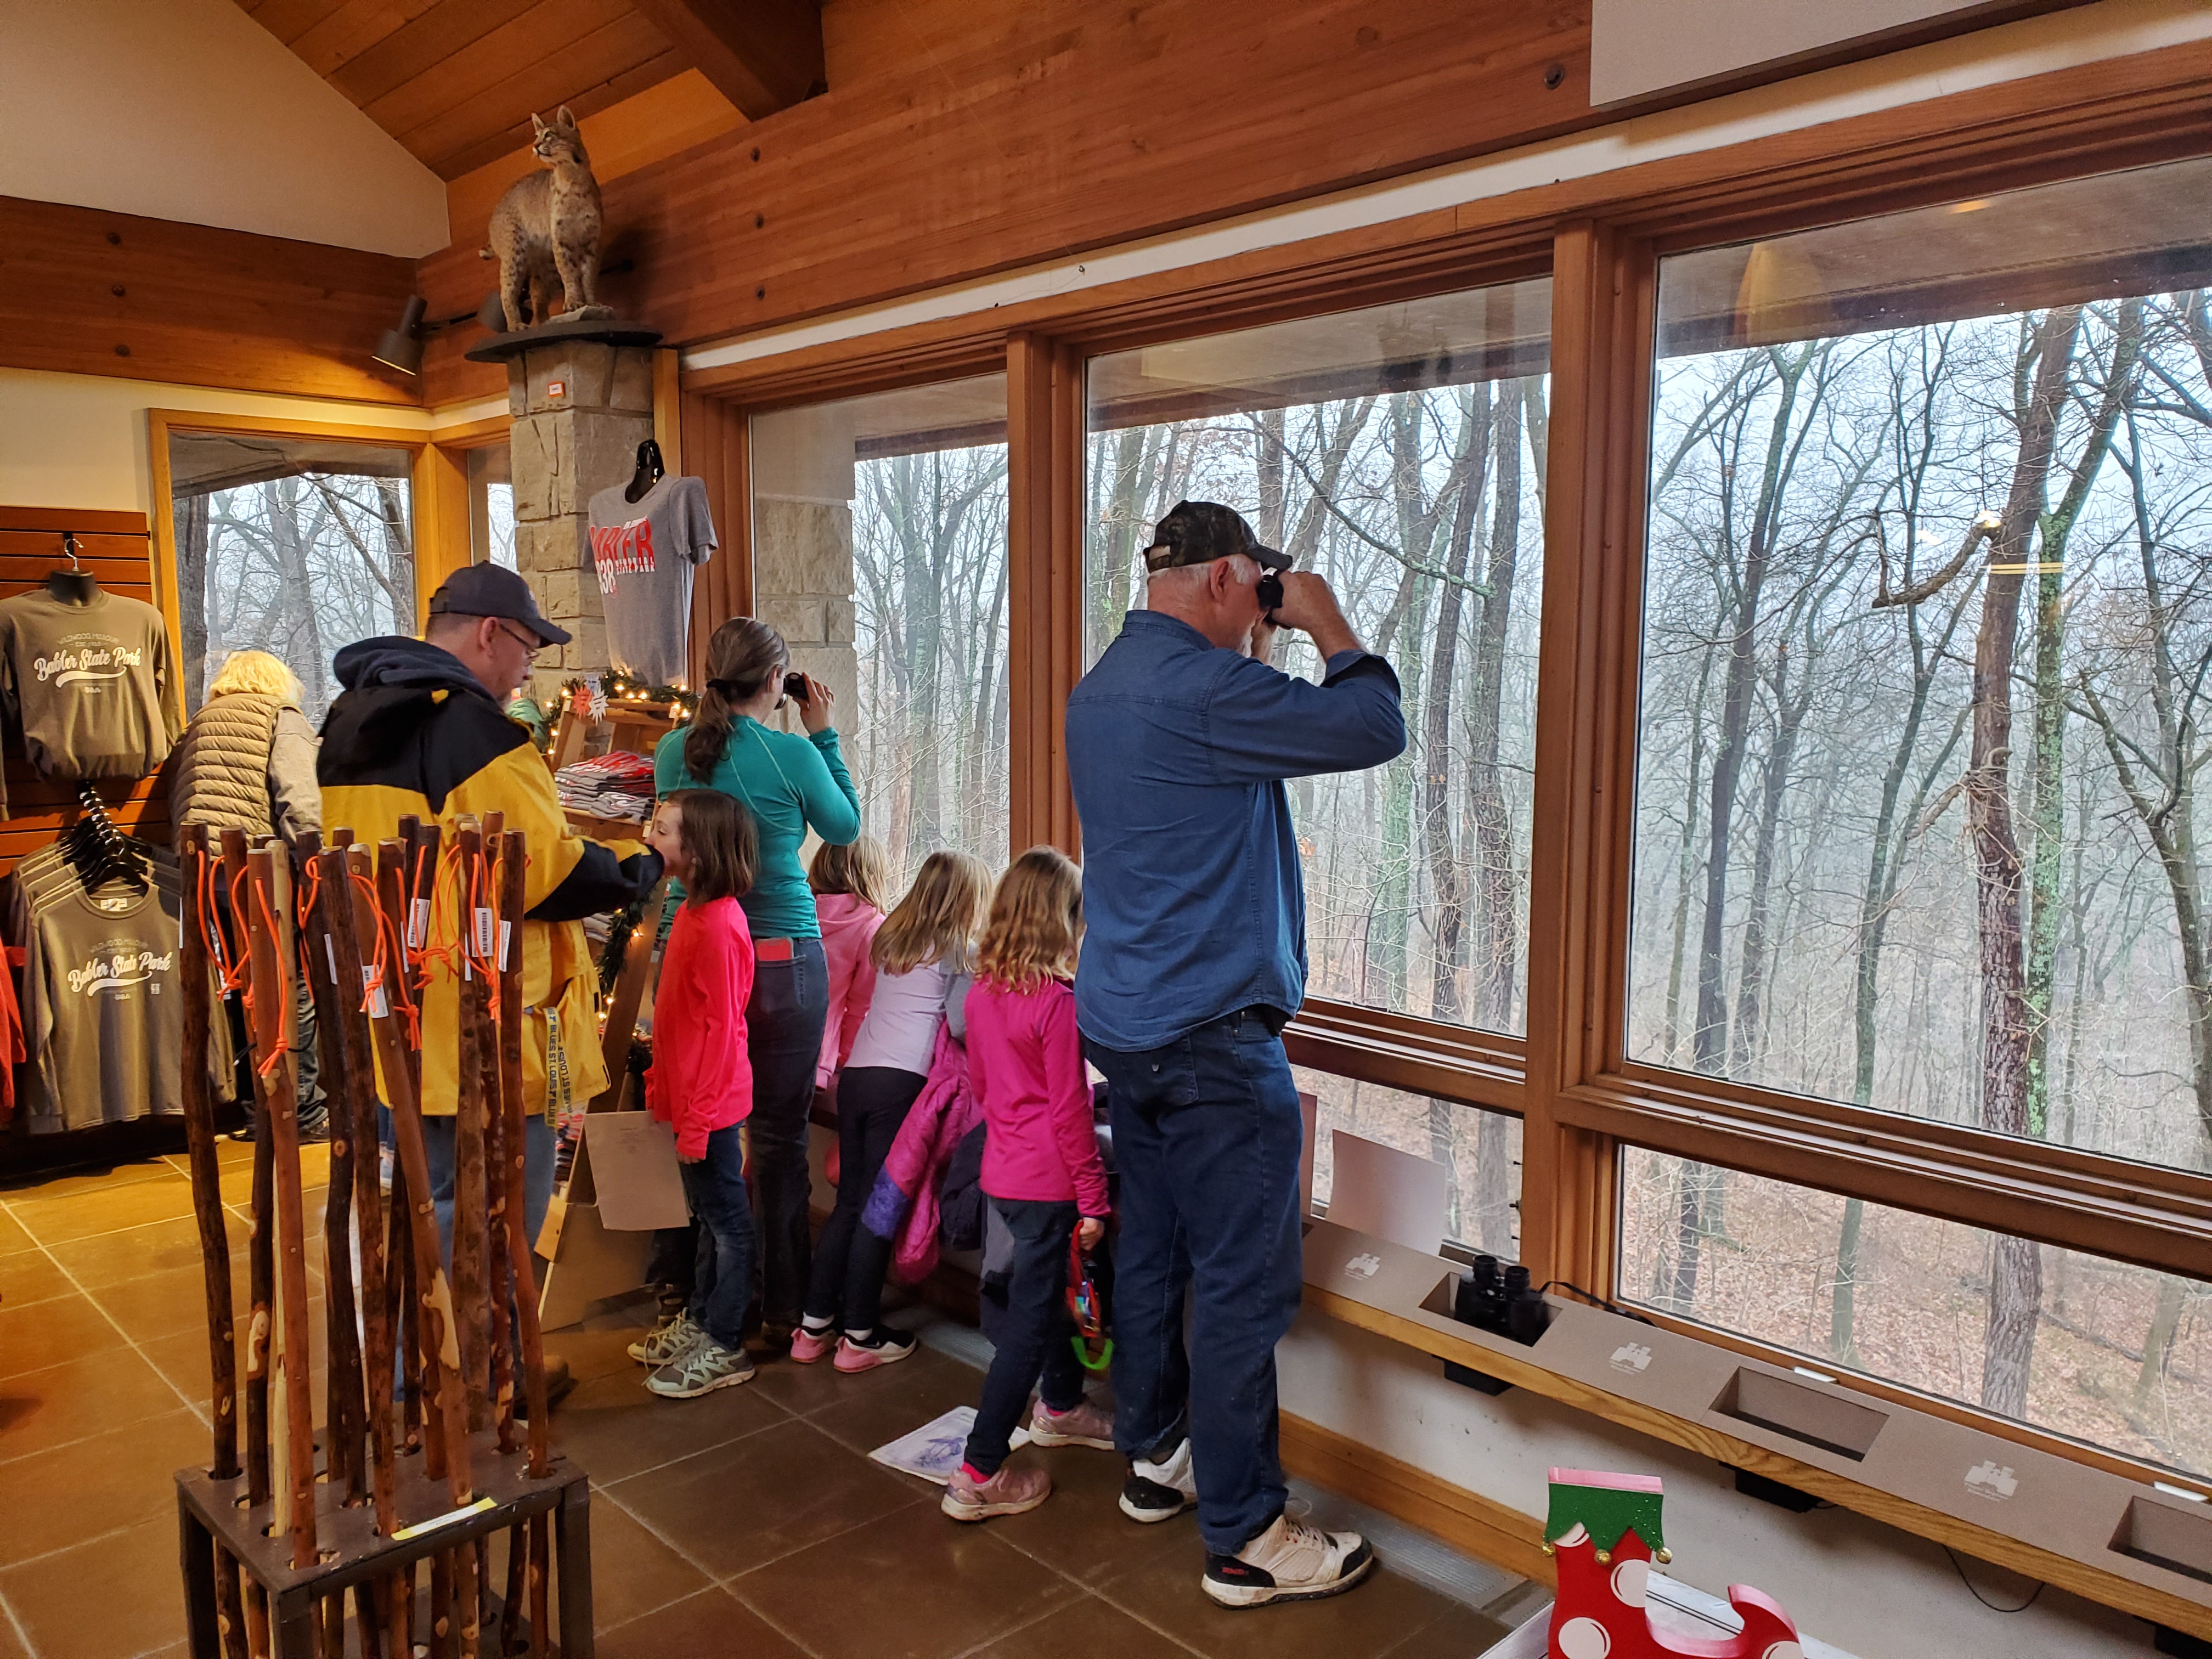 Guests at the visitor center's viewing area use binoculars to look into the woods through large windows